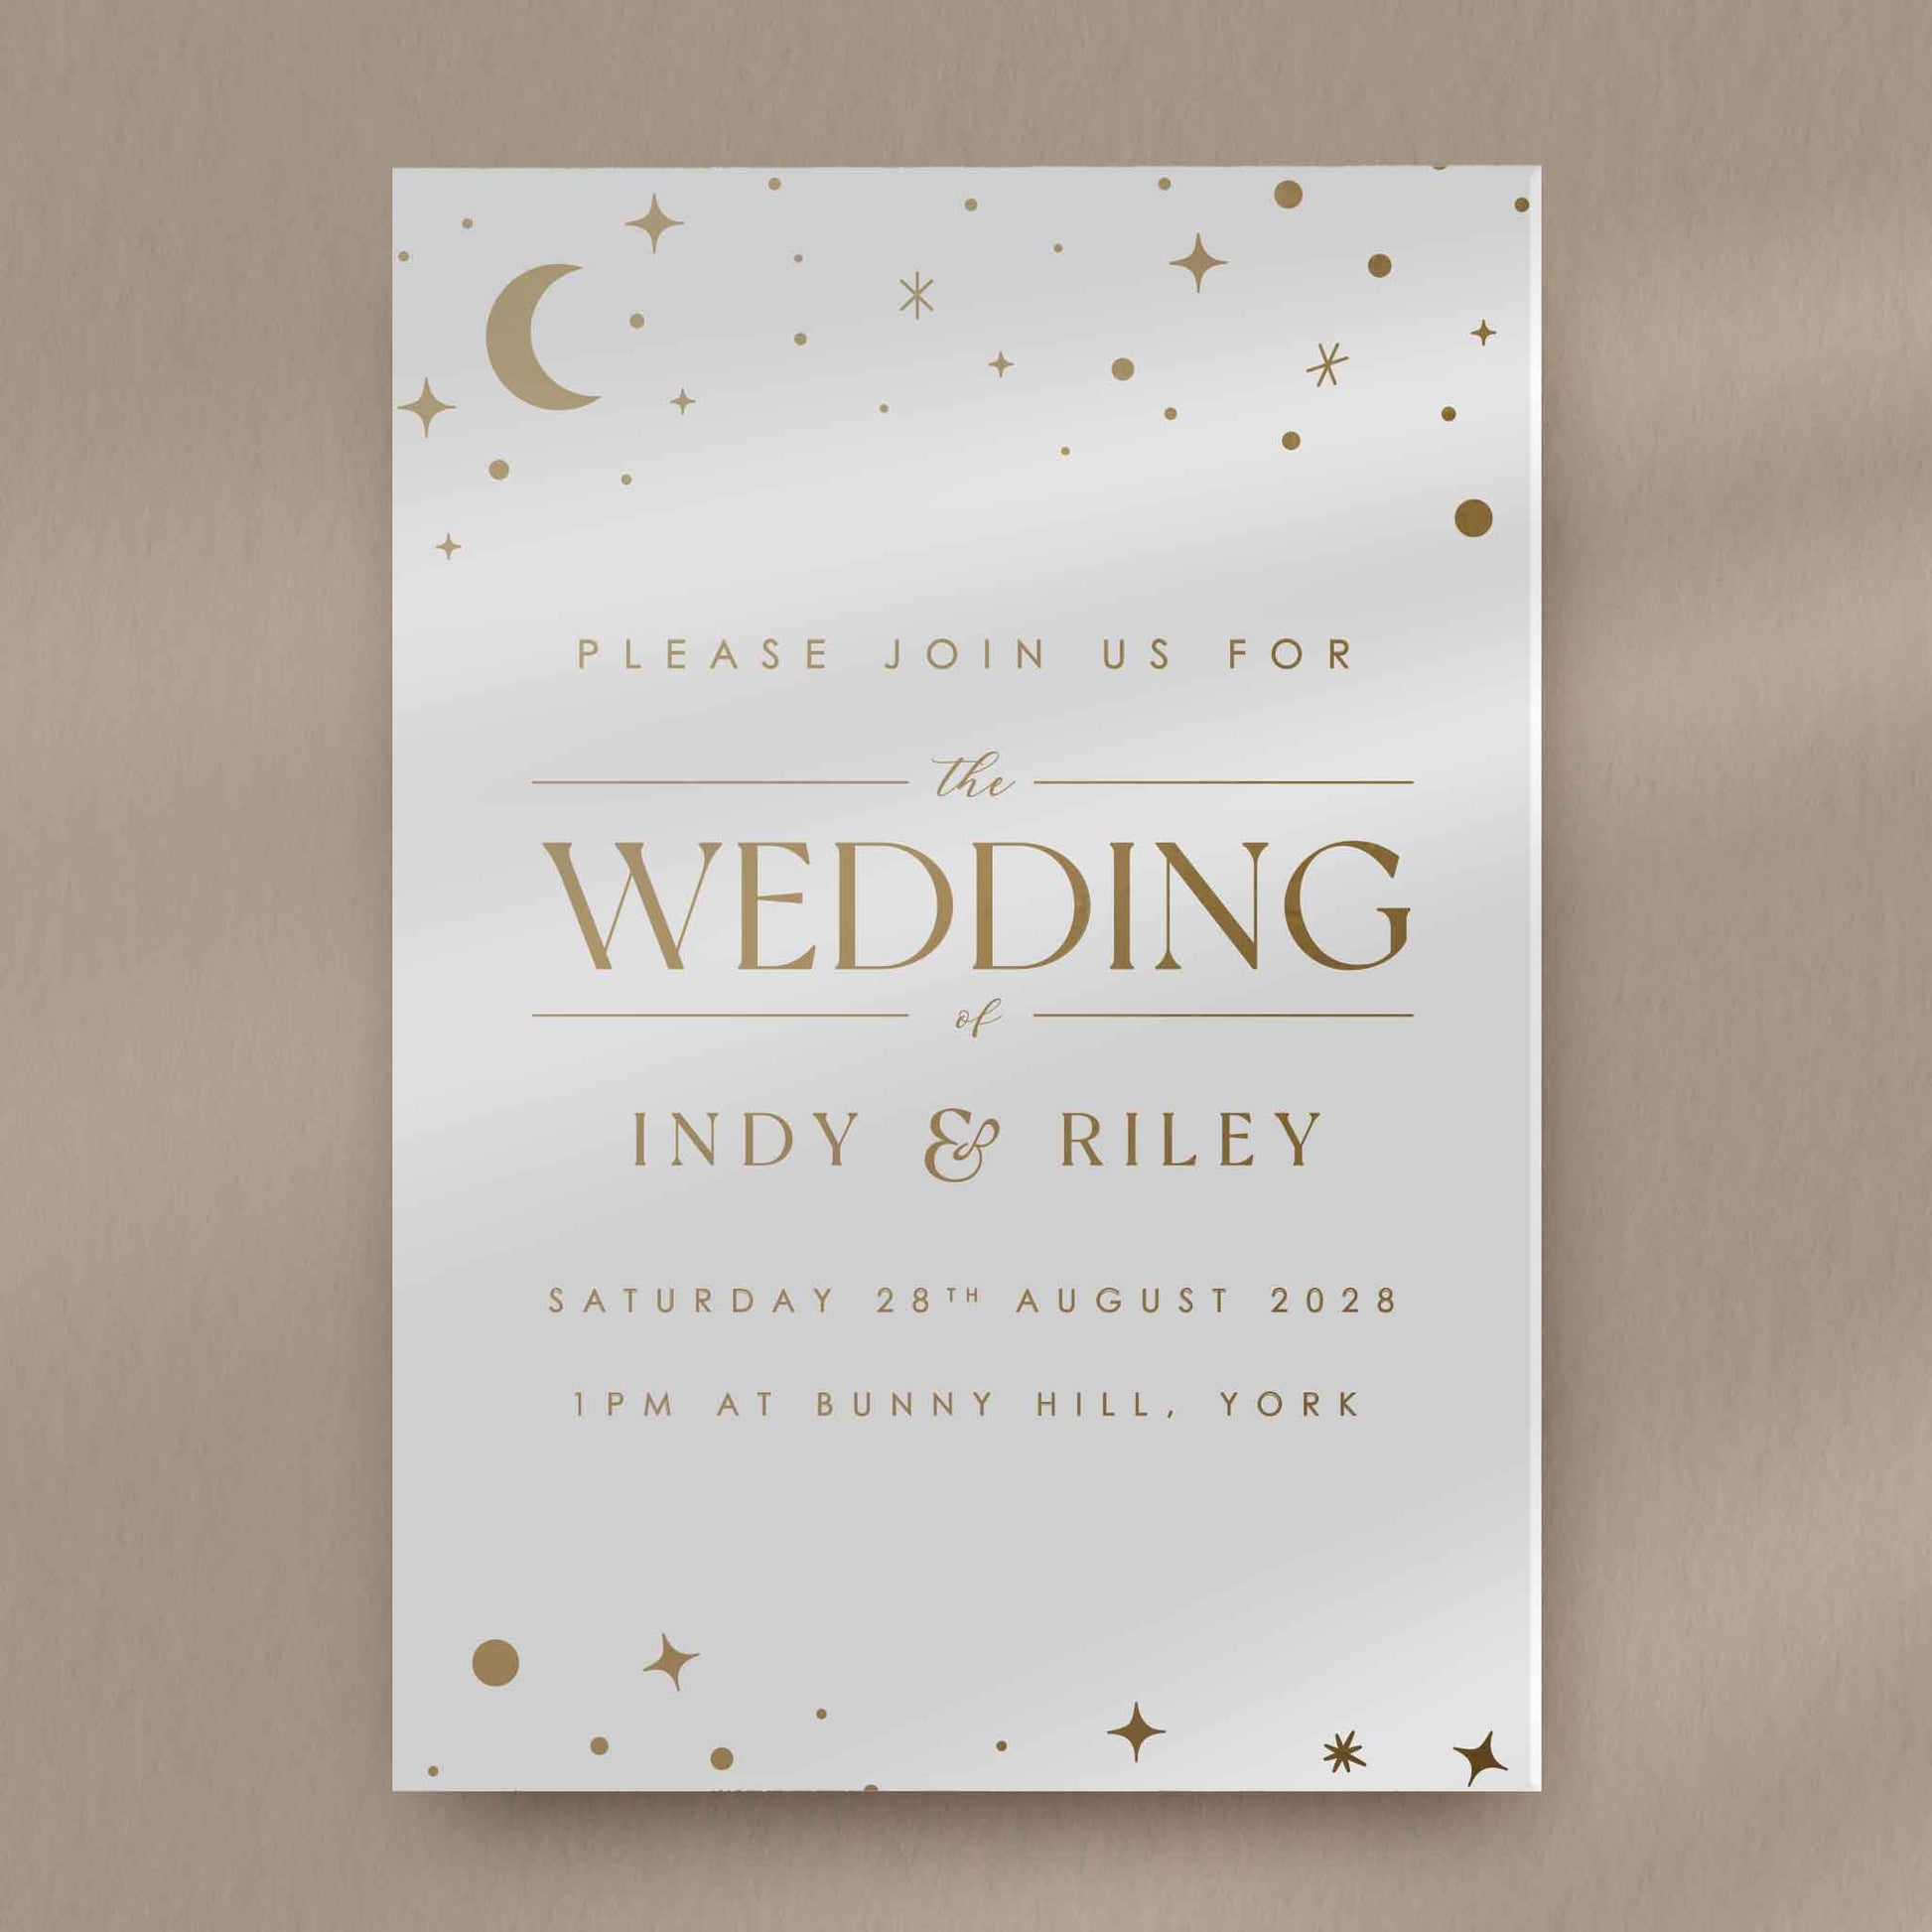 Day Invitation Sample  Ivy and Gold Wedding Stationery Indy  